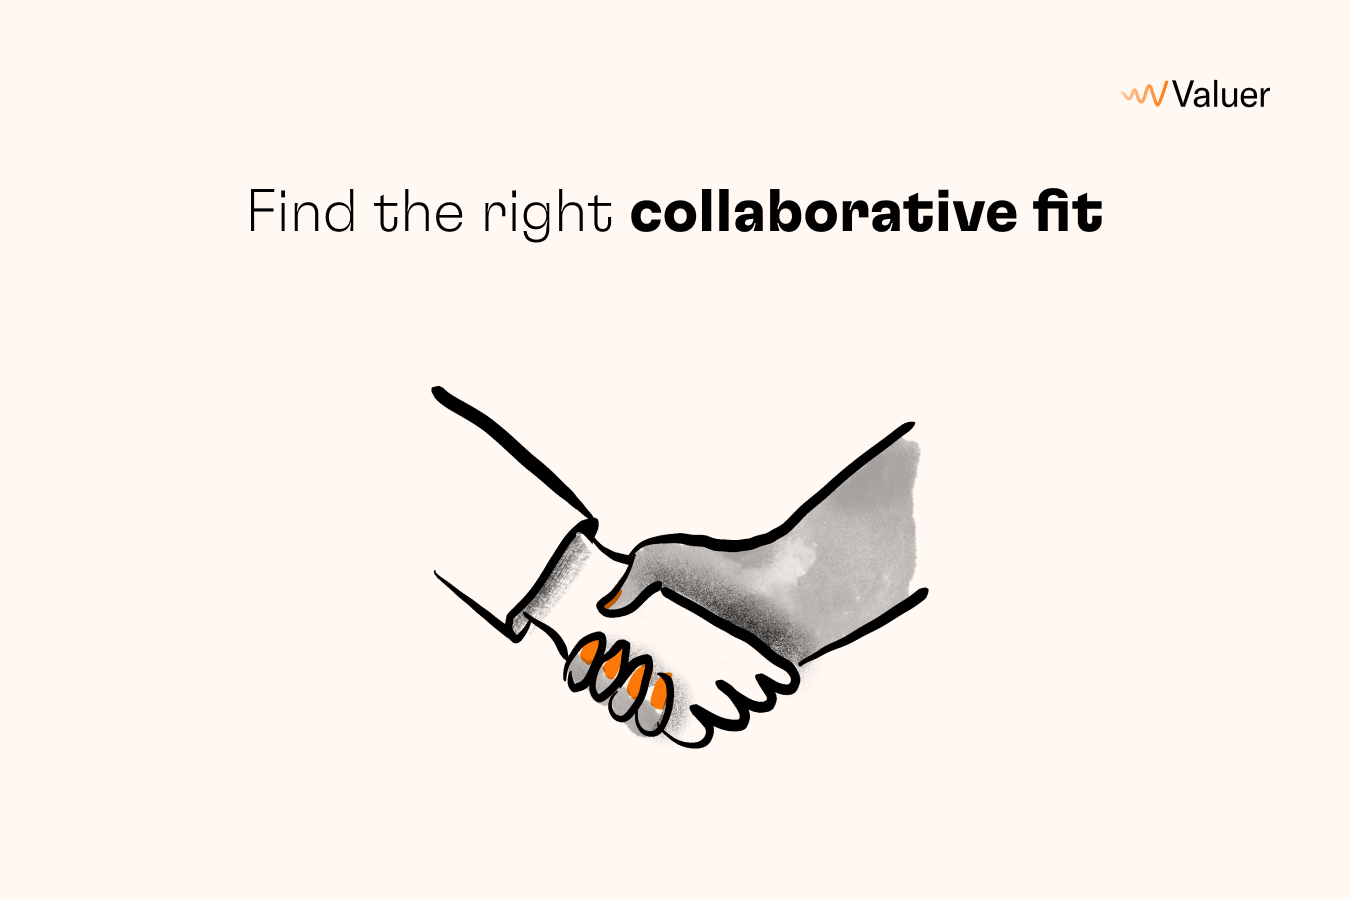 Find the right collaborative fit